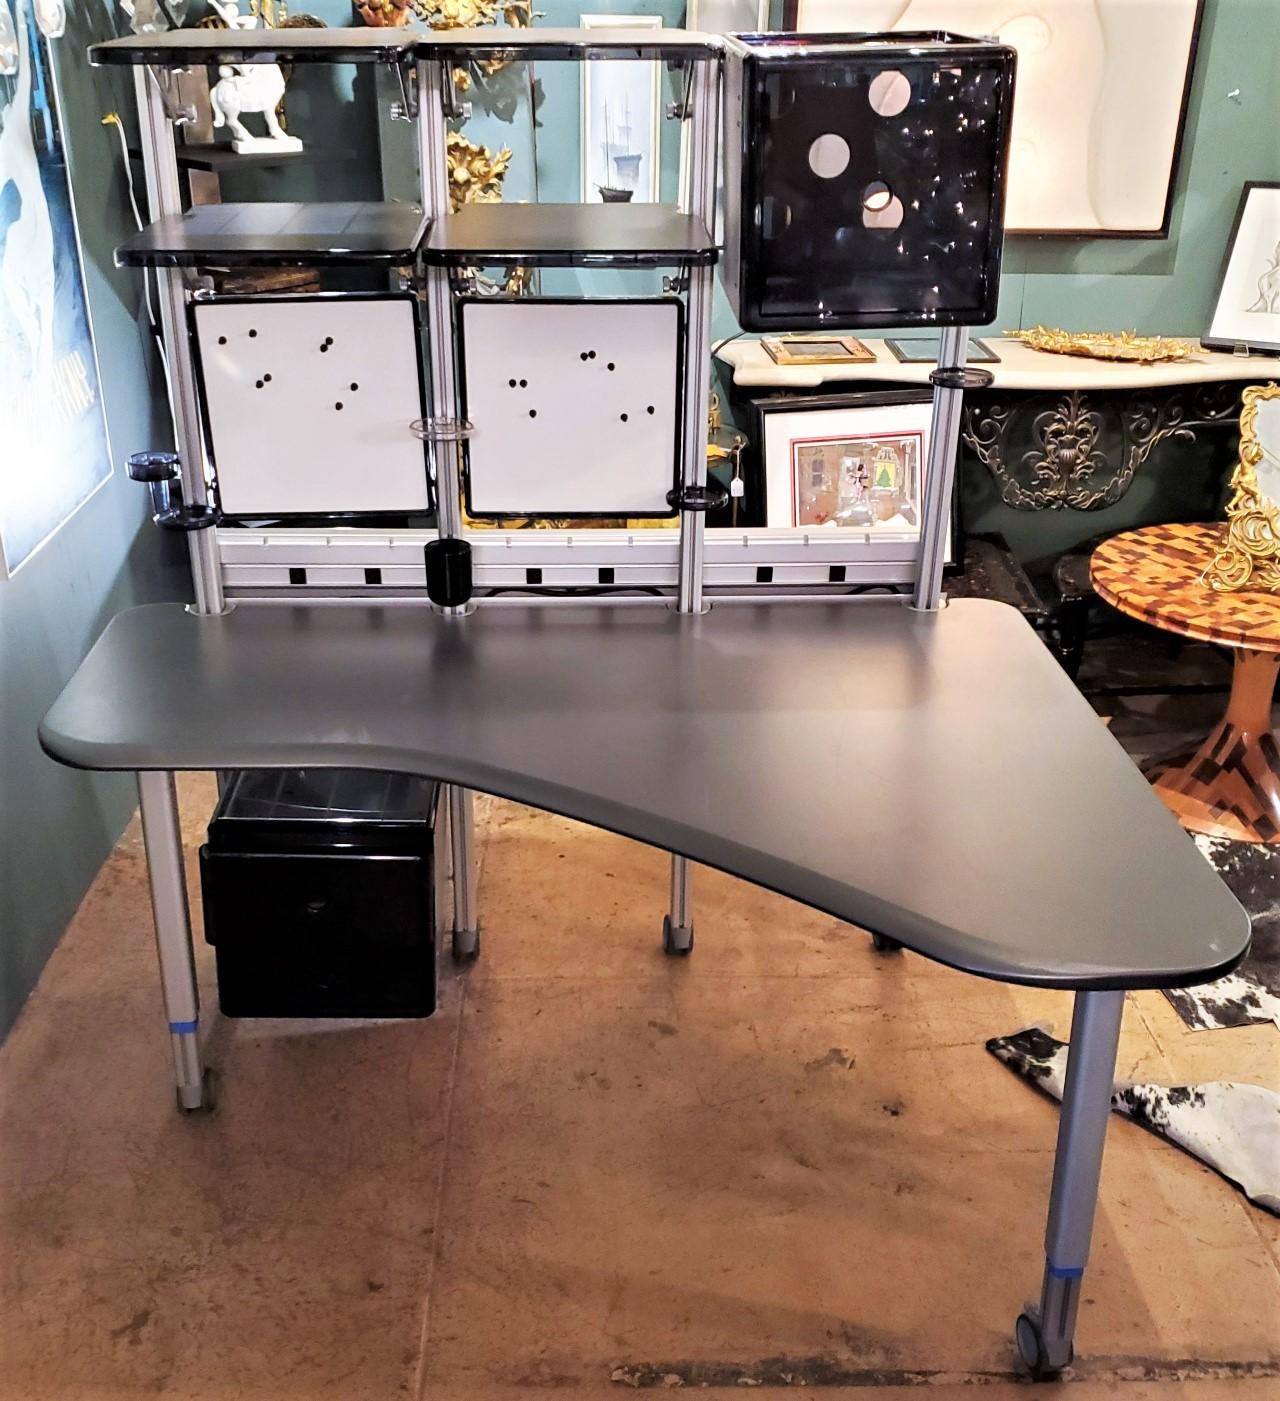 Award winning designer Richard Hollbrook designer for Herman Miller
Modern shelved desk with well thought out placement for the busy worker.

Measures: Table height is 29.5.